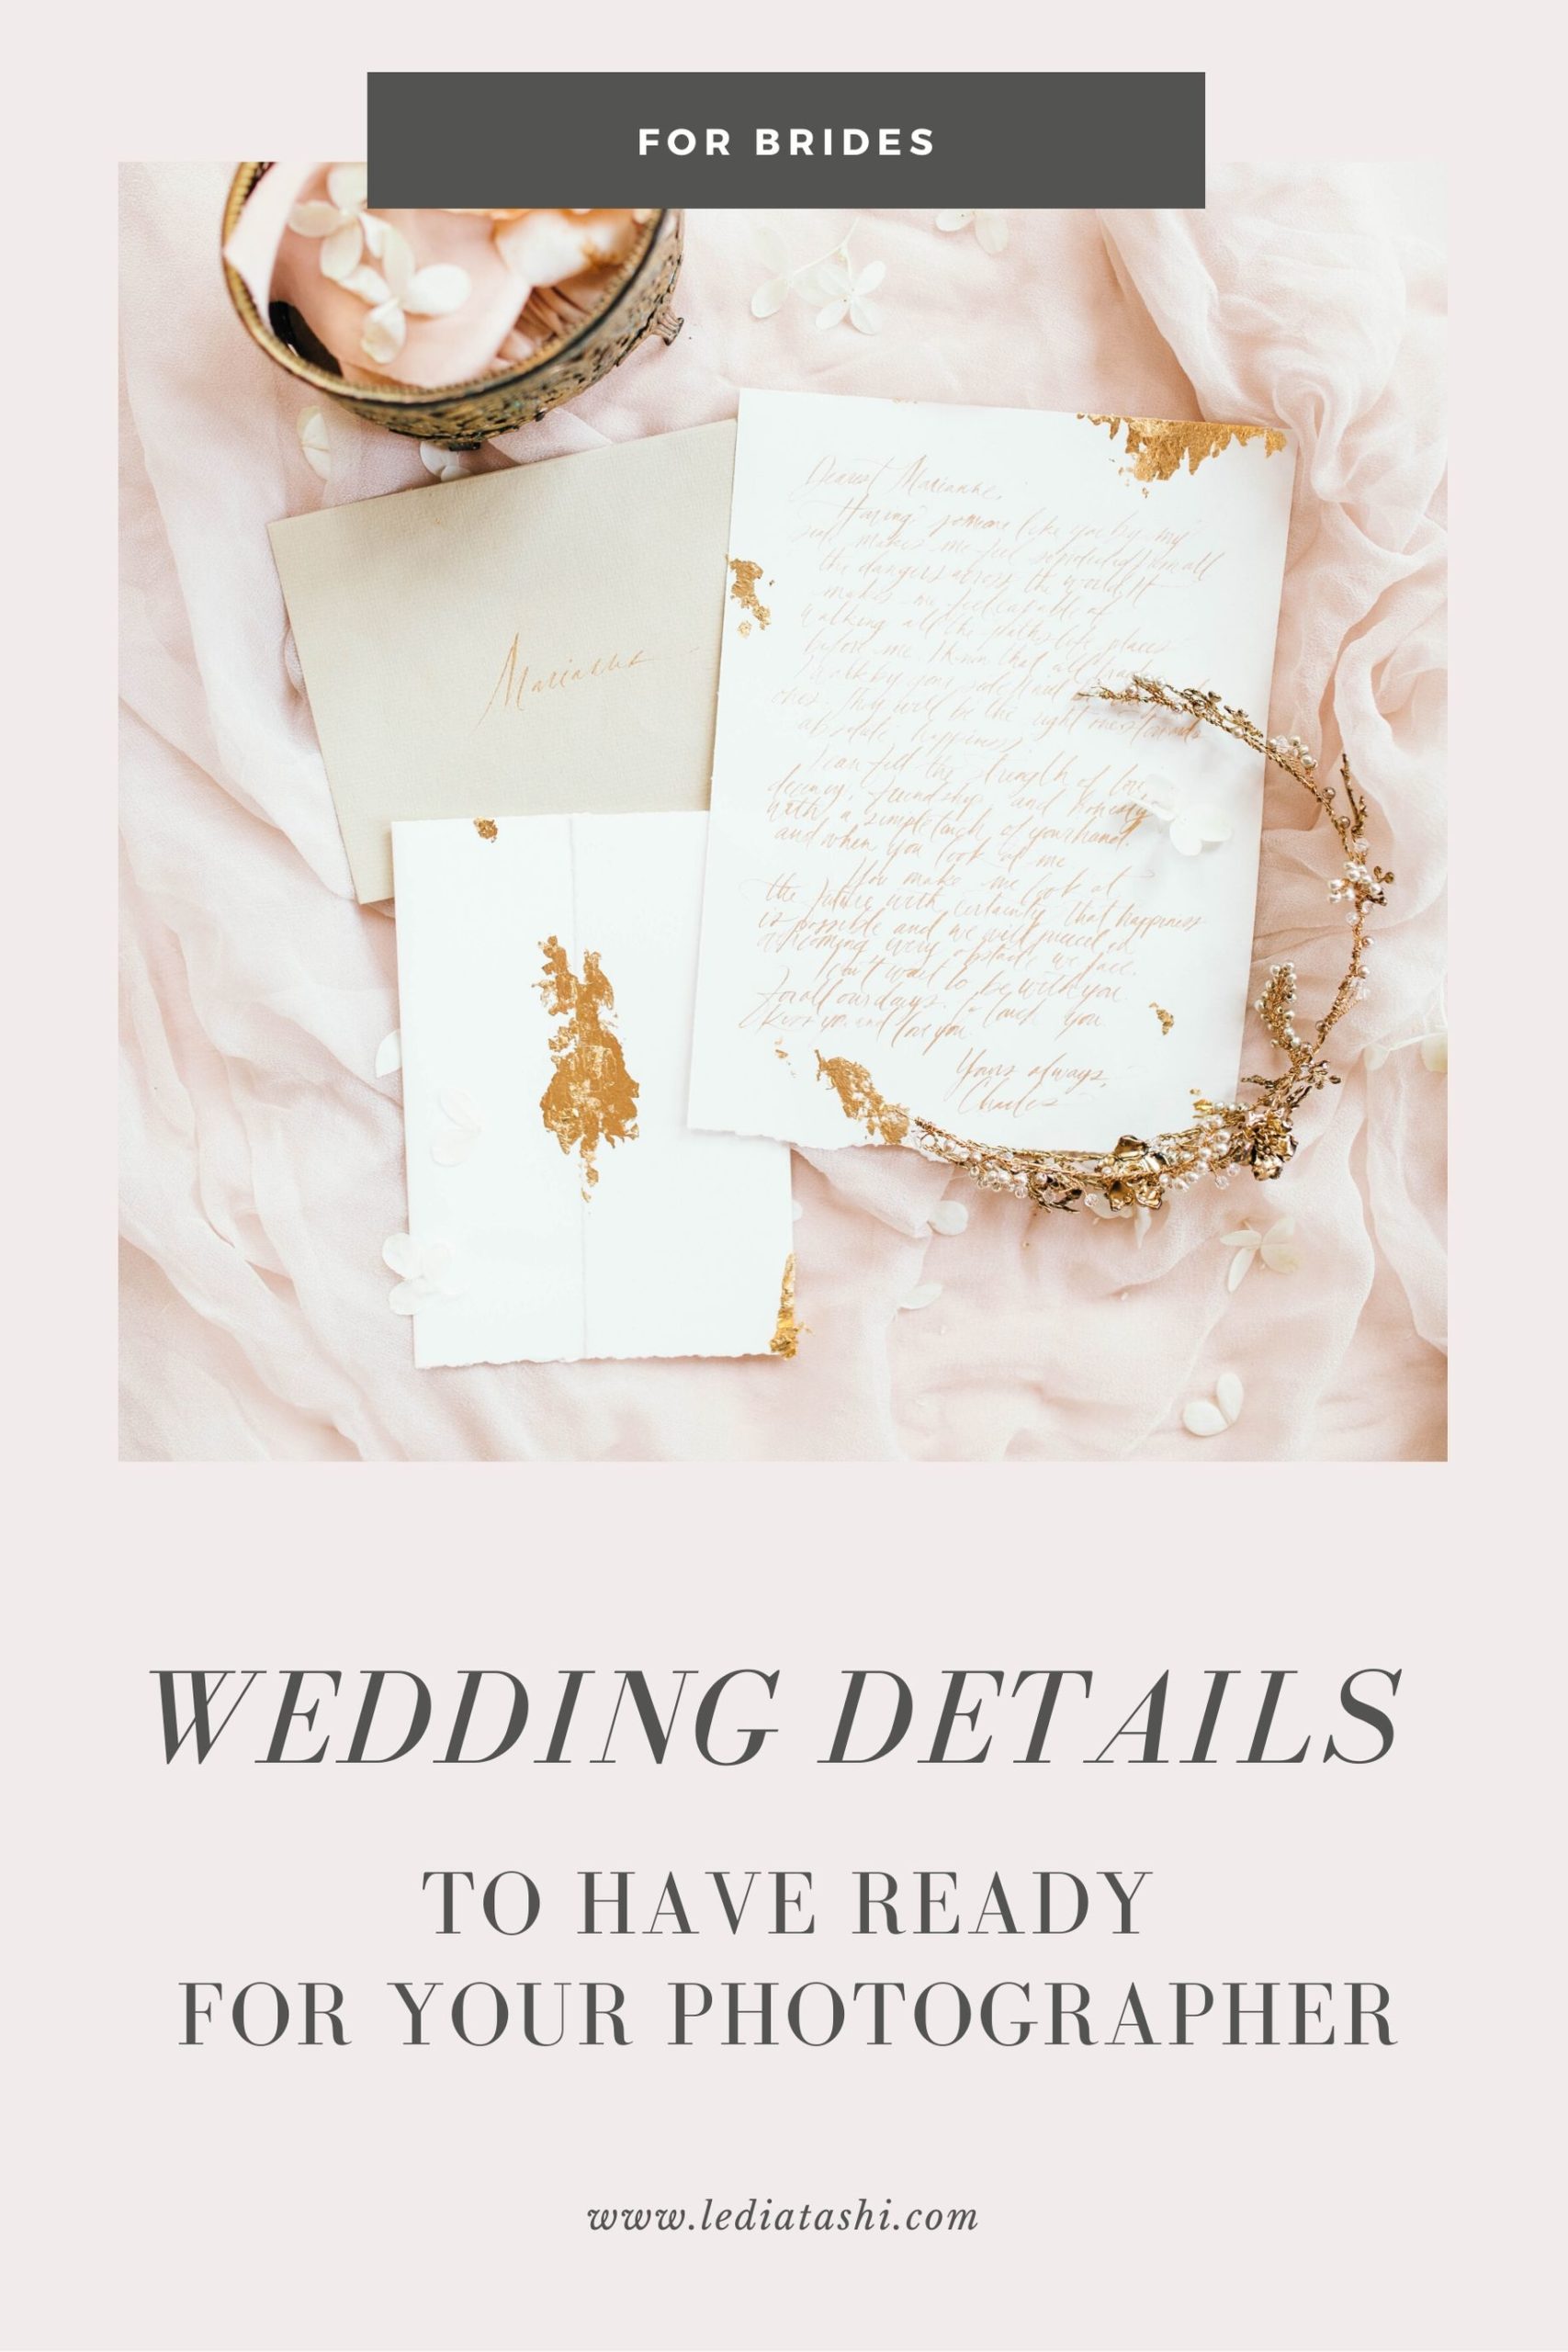 What details to have ready for your wedding photographer